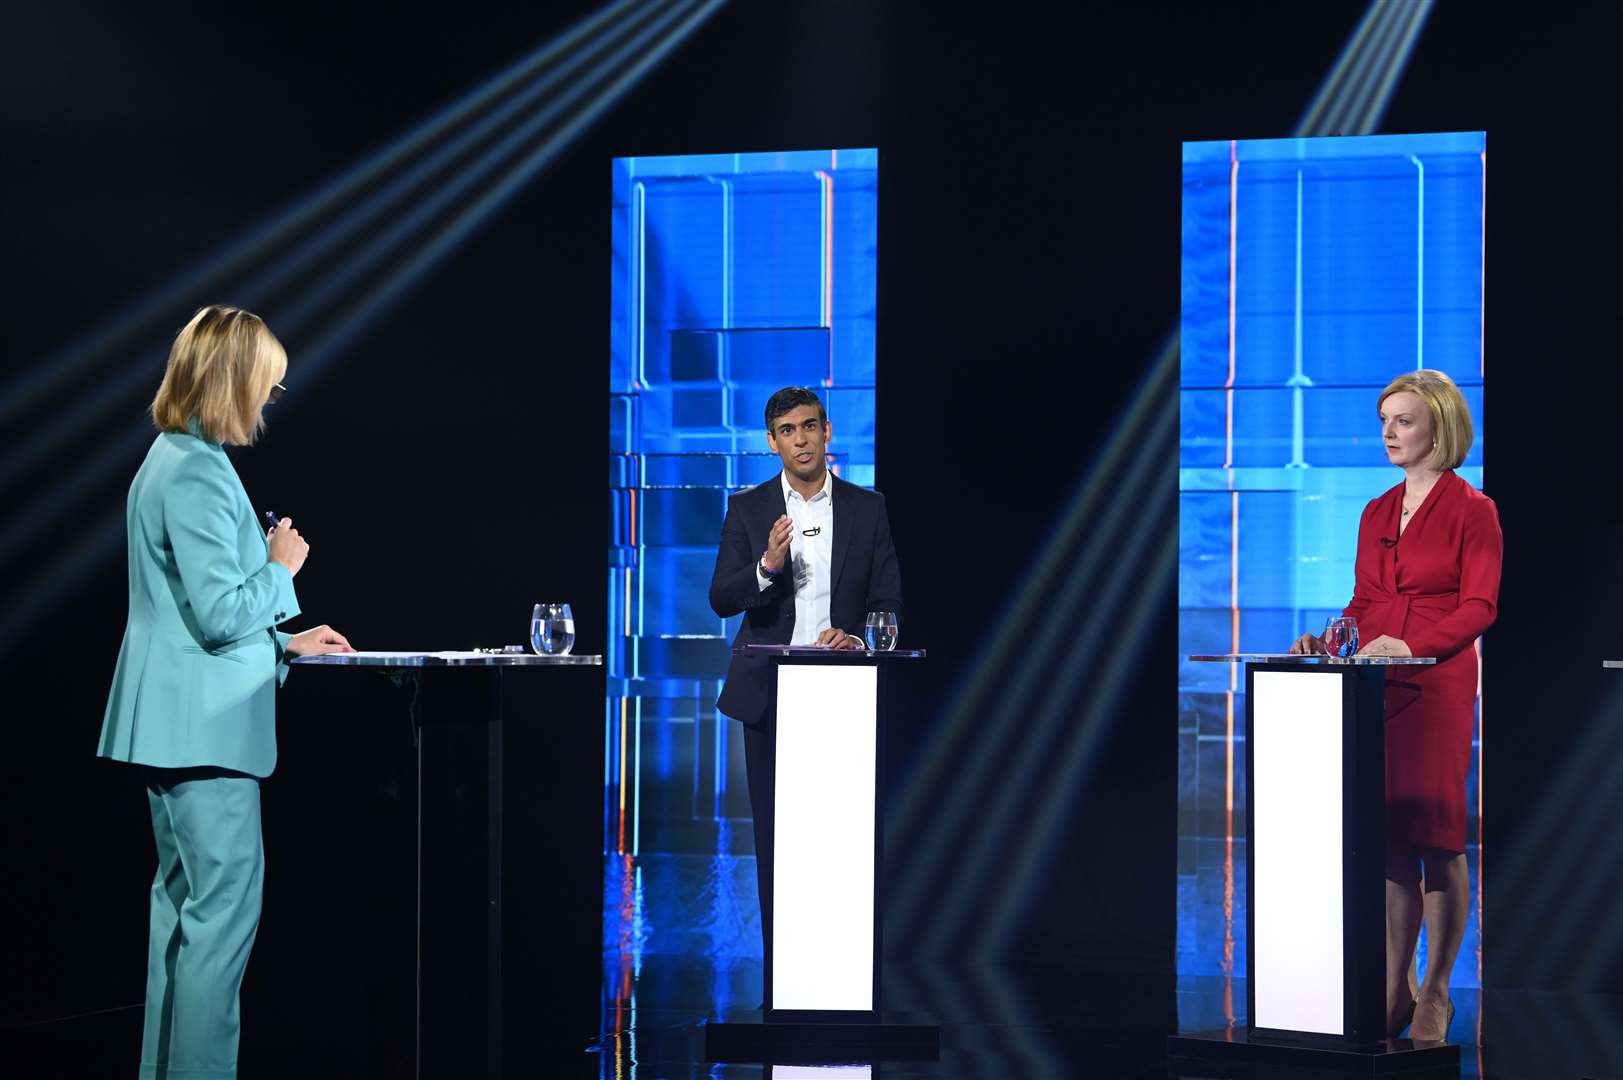 Liz Truss and Rishi Sunak are set to face Conservative party members across the country (Jonathan Hordle/ITV/PA)